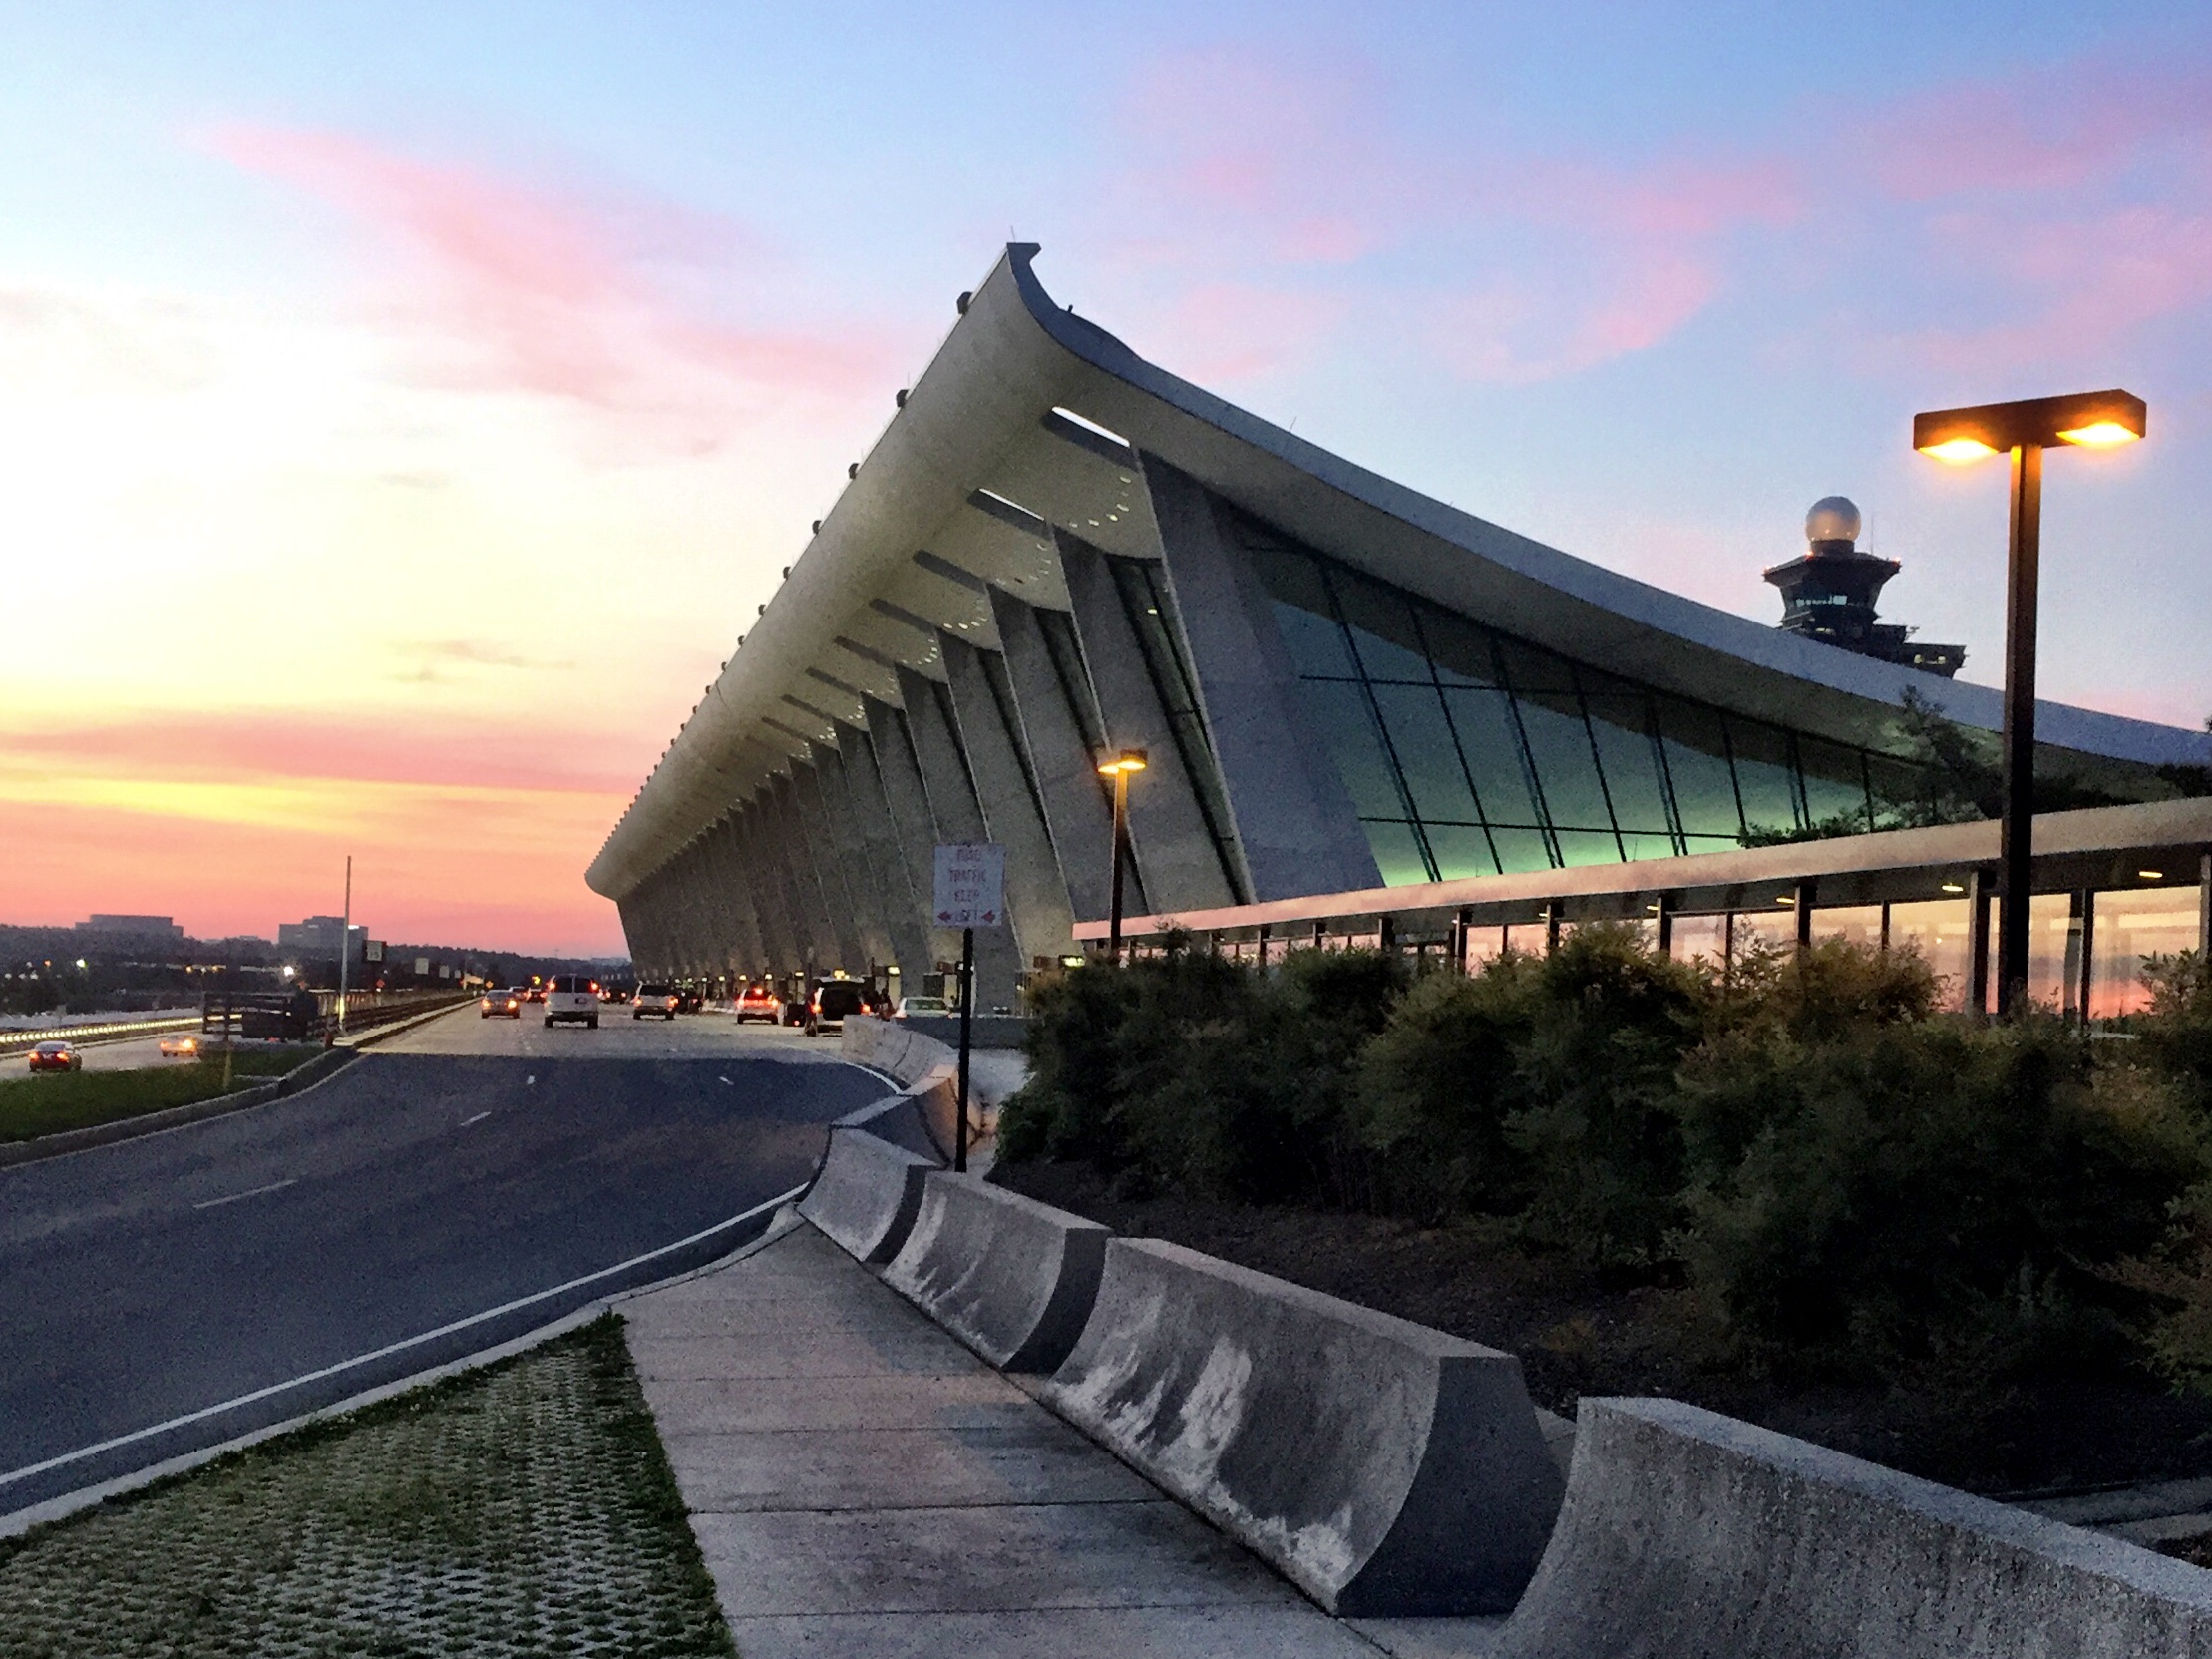 Future Dulles Airport arrivals could include horses